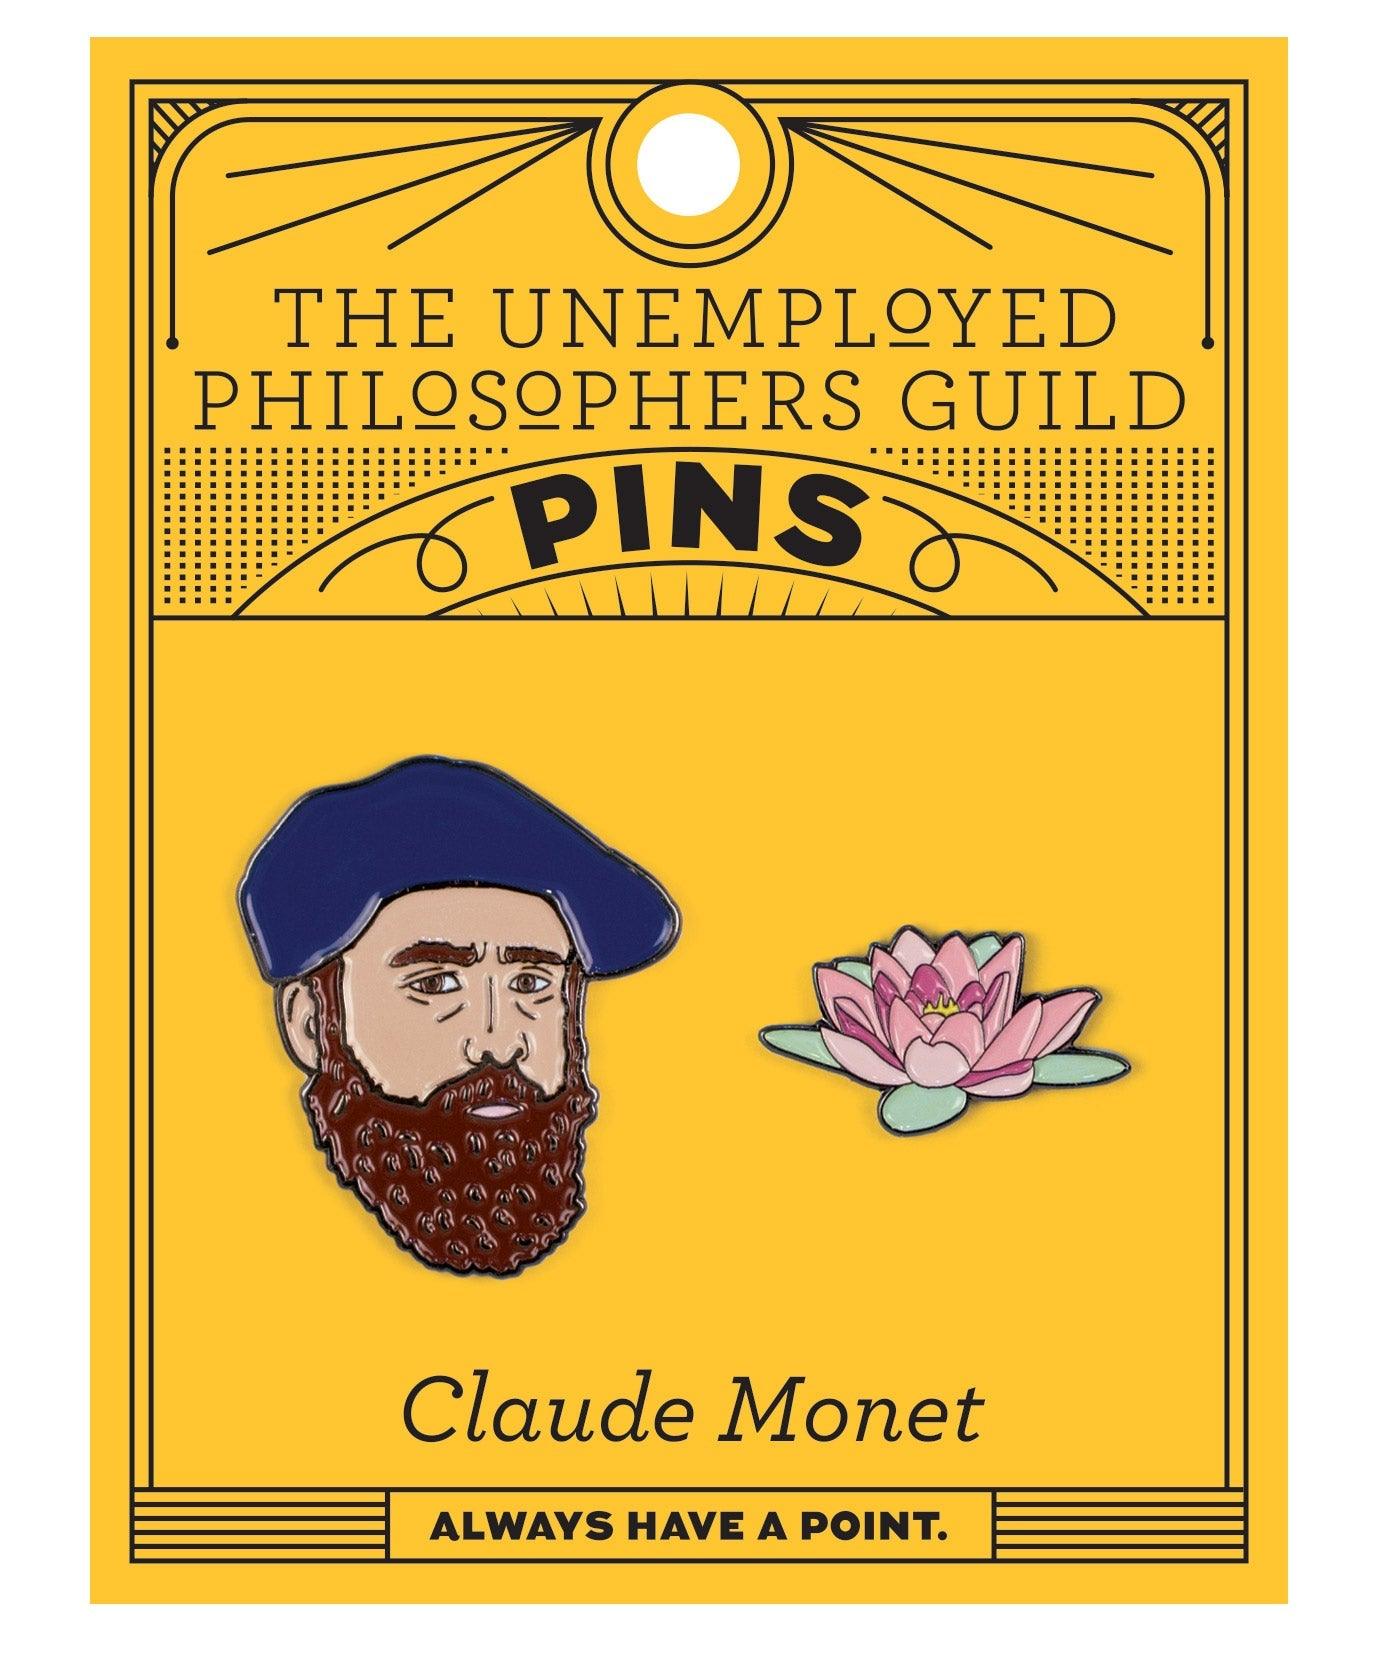 Product photo of Monet & Water Lily Enamel Pin Set, a novelty gift manufactured by The Unemployed Philosophers Guild.